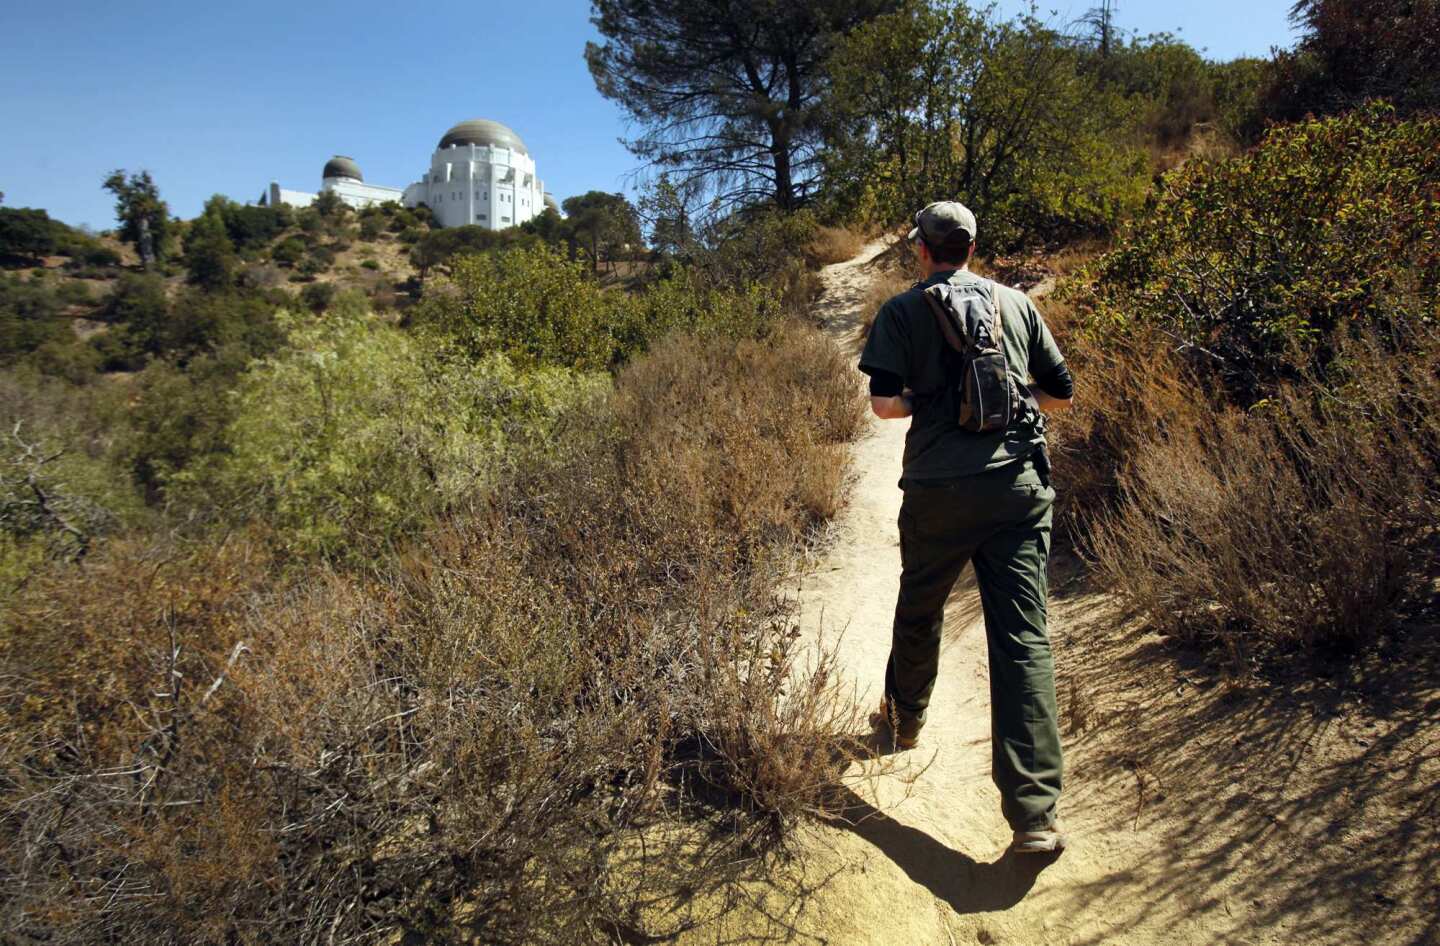 Jeff Sikich, wildlife biologist with the National Park Service, walks a trail in Griffith Park near the observatory to access remote cameras used to monitor activity by mountain lion P-22, who scientists believe crossed both the 405 and 101 freeways to access one of the largest municipal parks in the country.